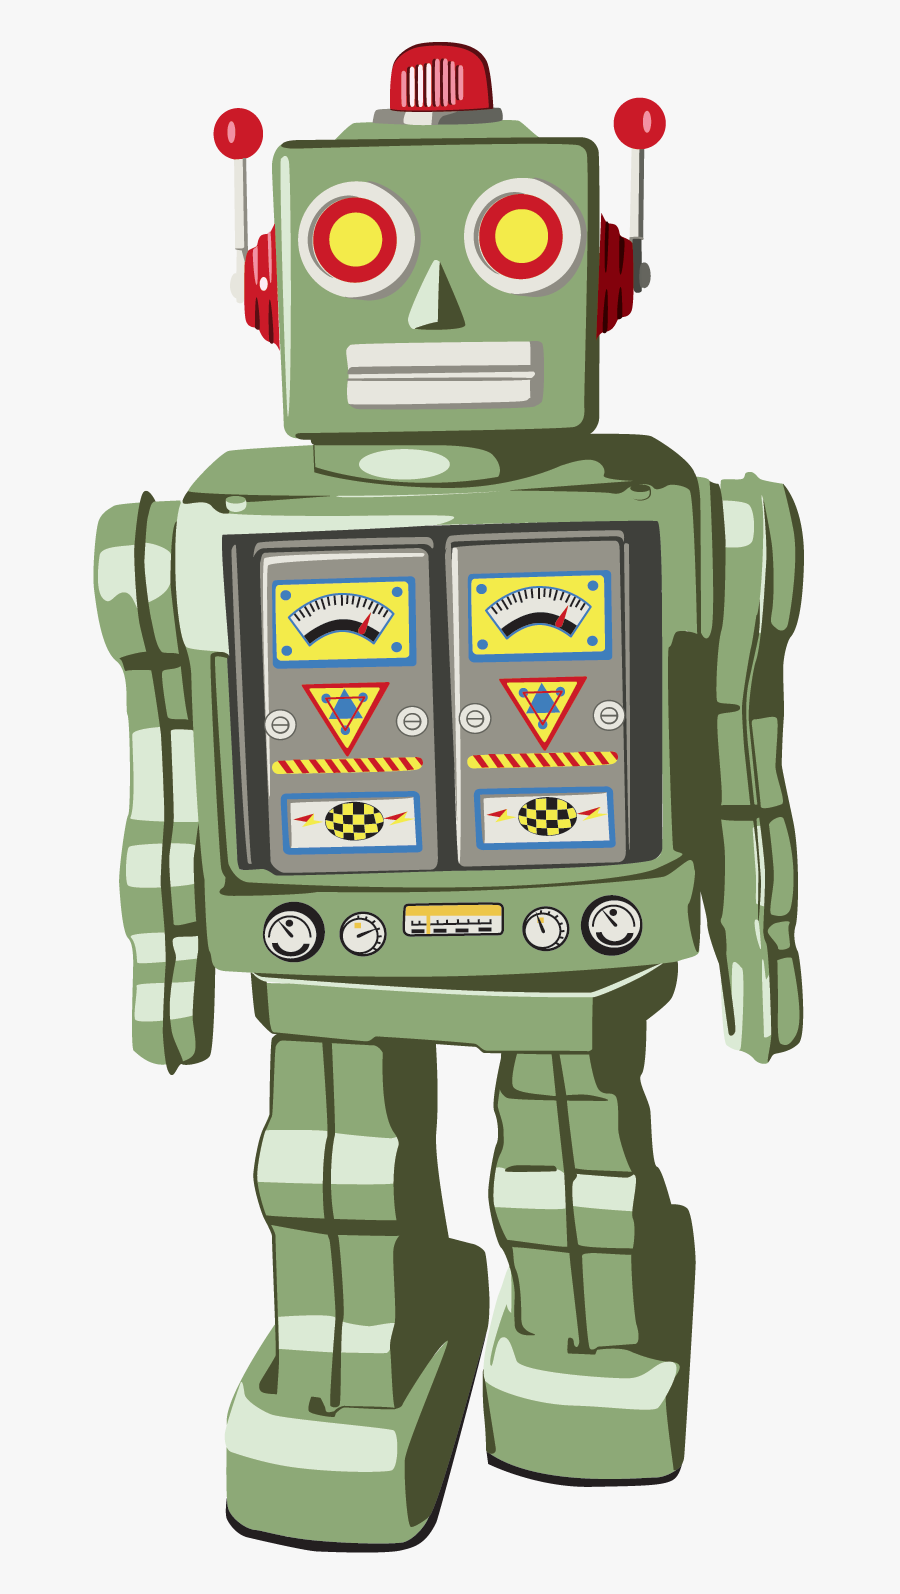 Clip Art The Robot Uprising And - Vintage Toy Robot Png, Transparent Clipart